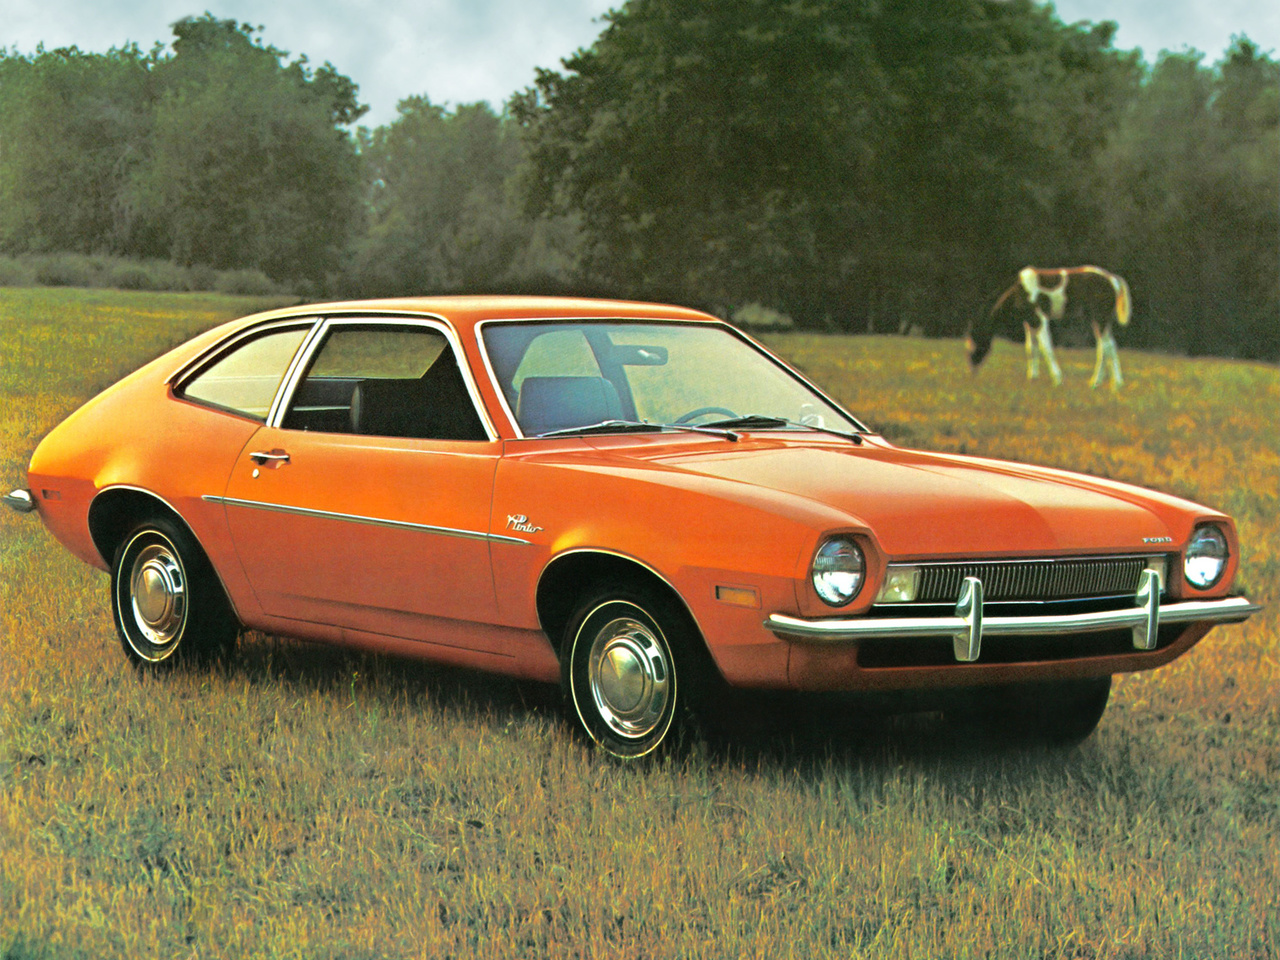 Ford Pinto #7.